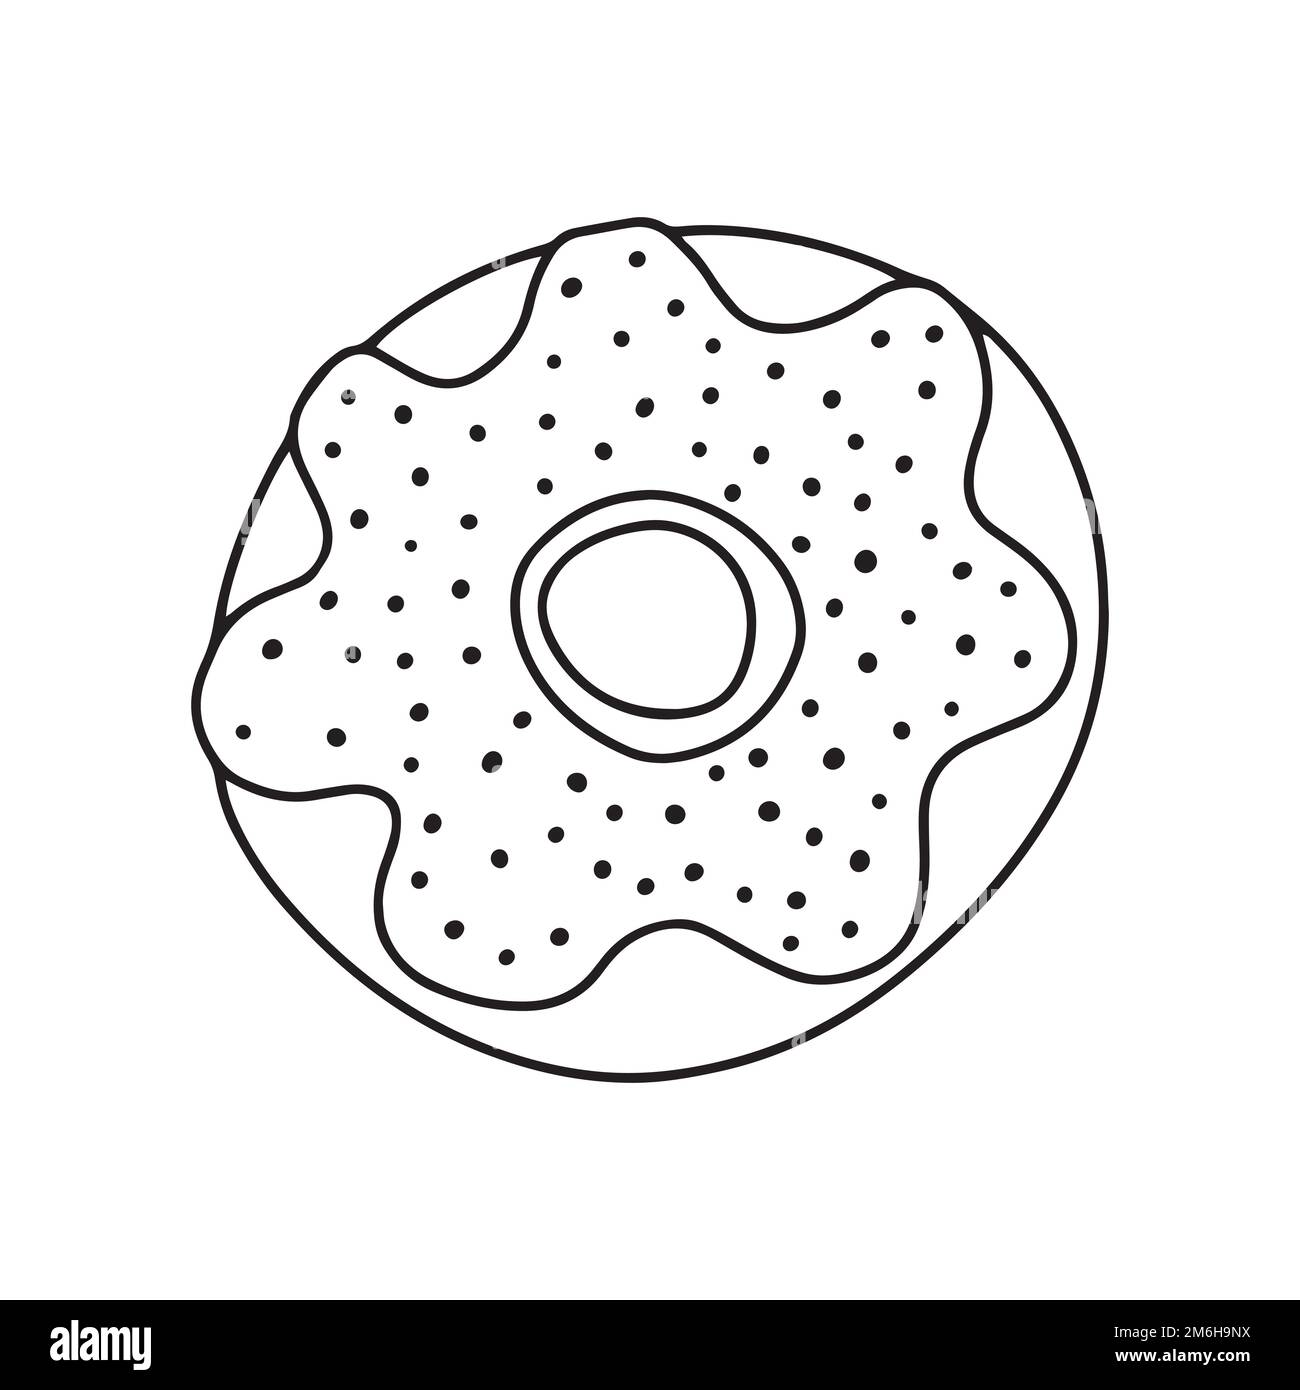 Hand drawn doodle donut Stock Vector